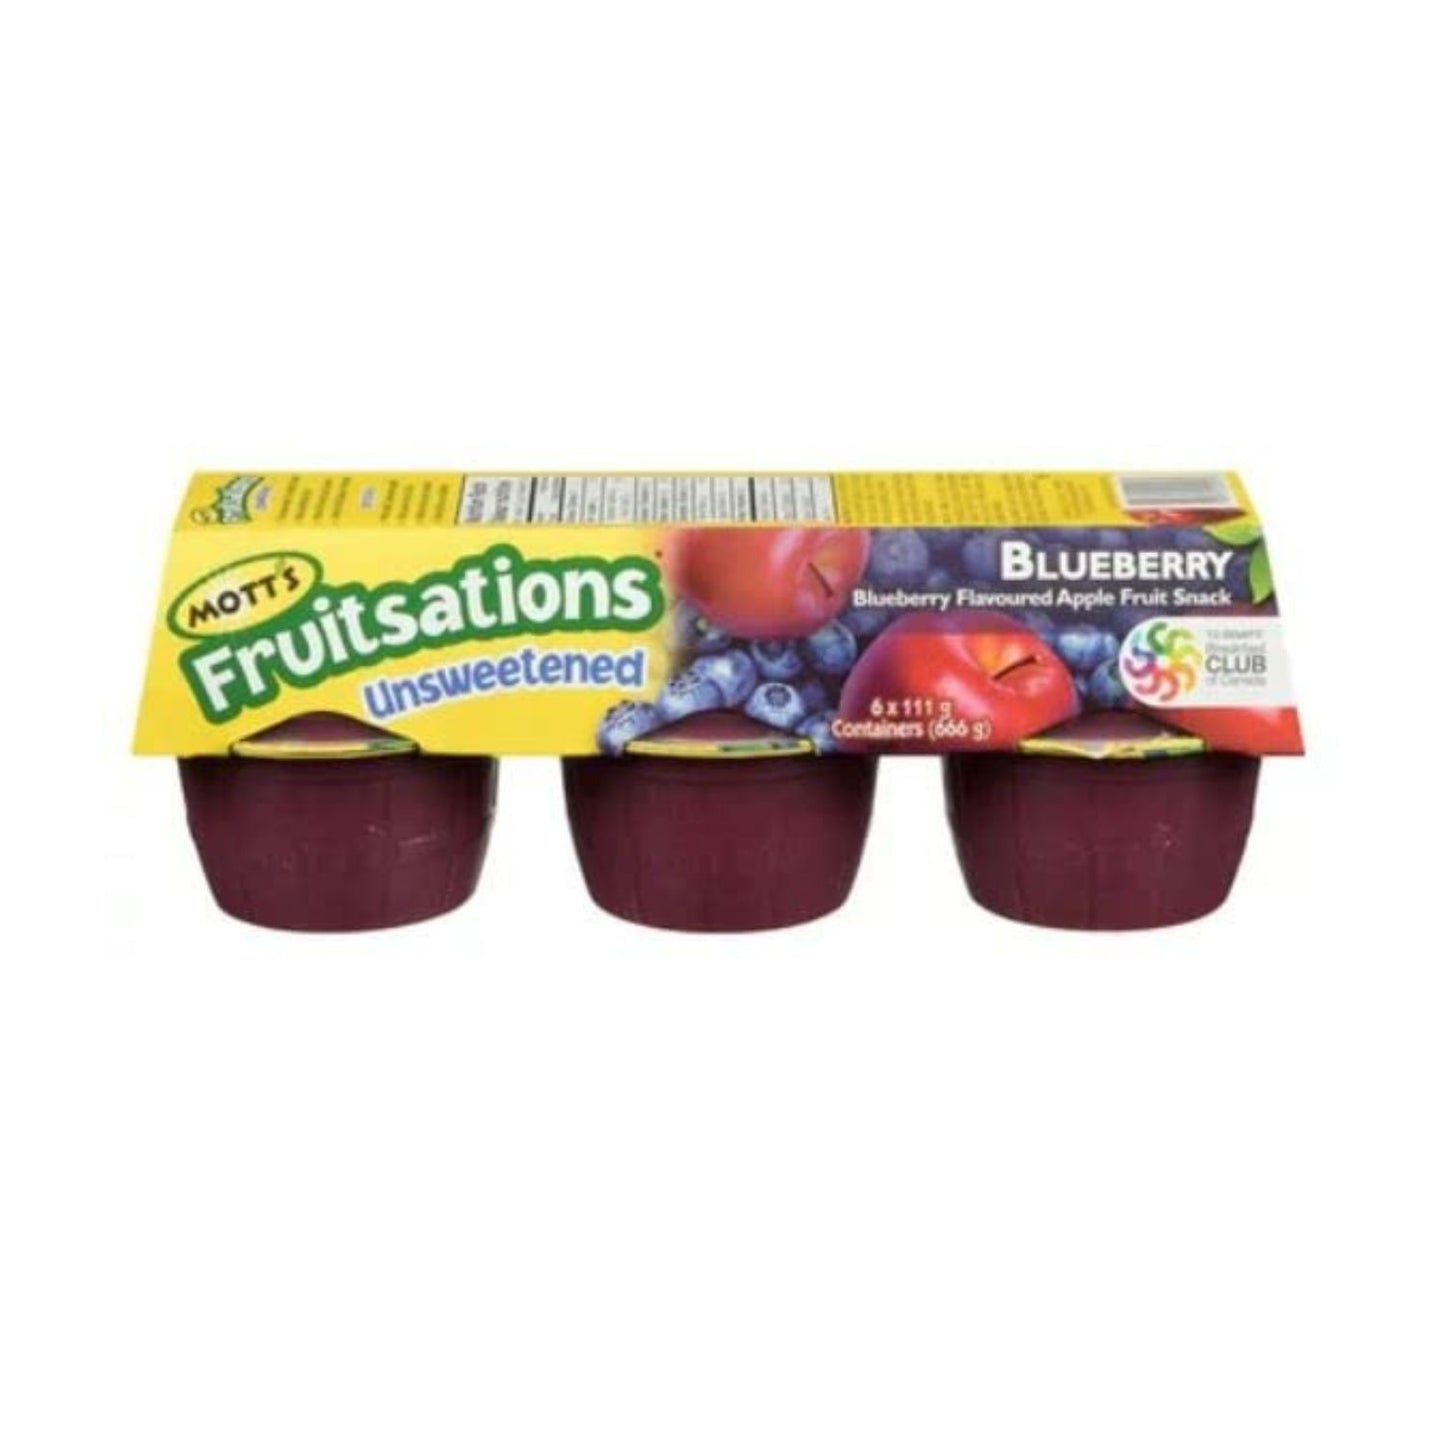 Mott’s Fruitsations Unsweetened Blueberry Delight Apple Sauce, 6 x 113g/4oz (Shipped from Canada)